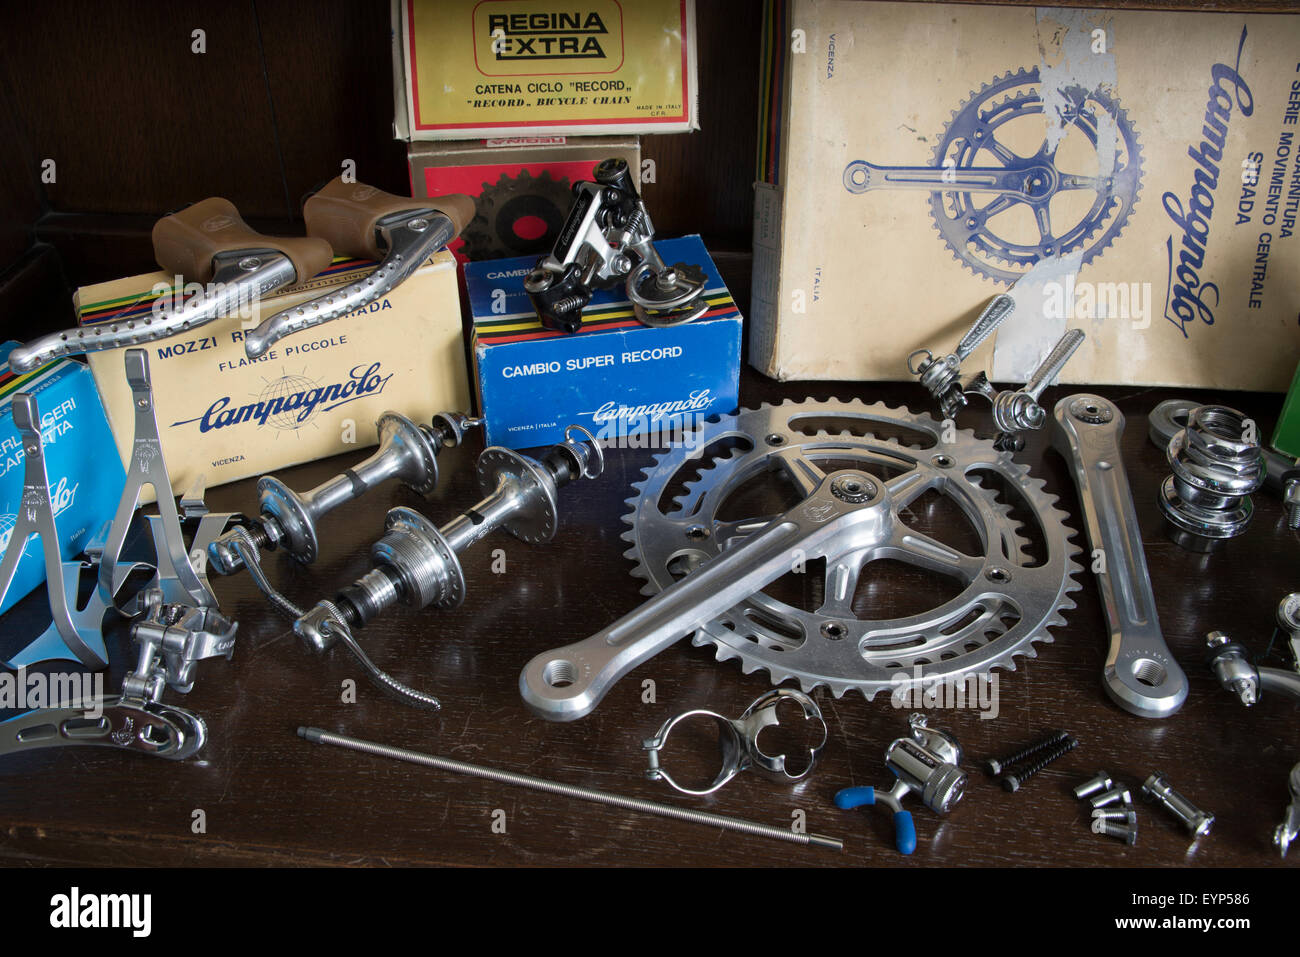 Classic vintage Campagnolo cycle components. Stock Photo